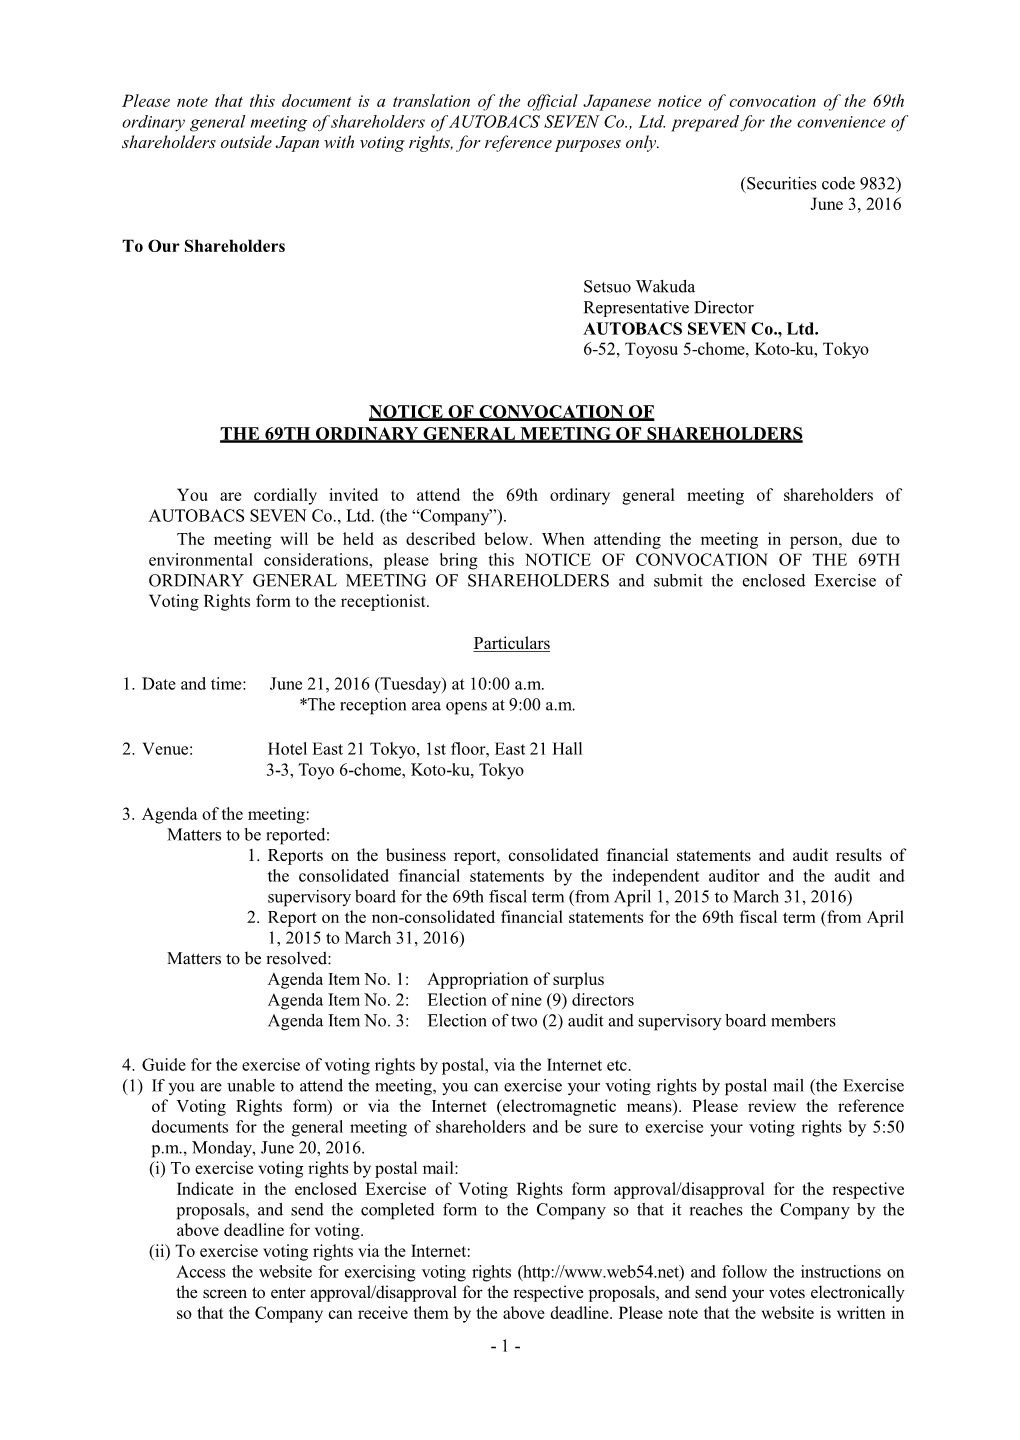 Notice of Convocation of the 69Th Ordinary General Meeting of Shareholders of AUTOBACS SEVEN Co., Ltd